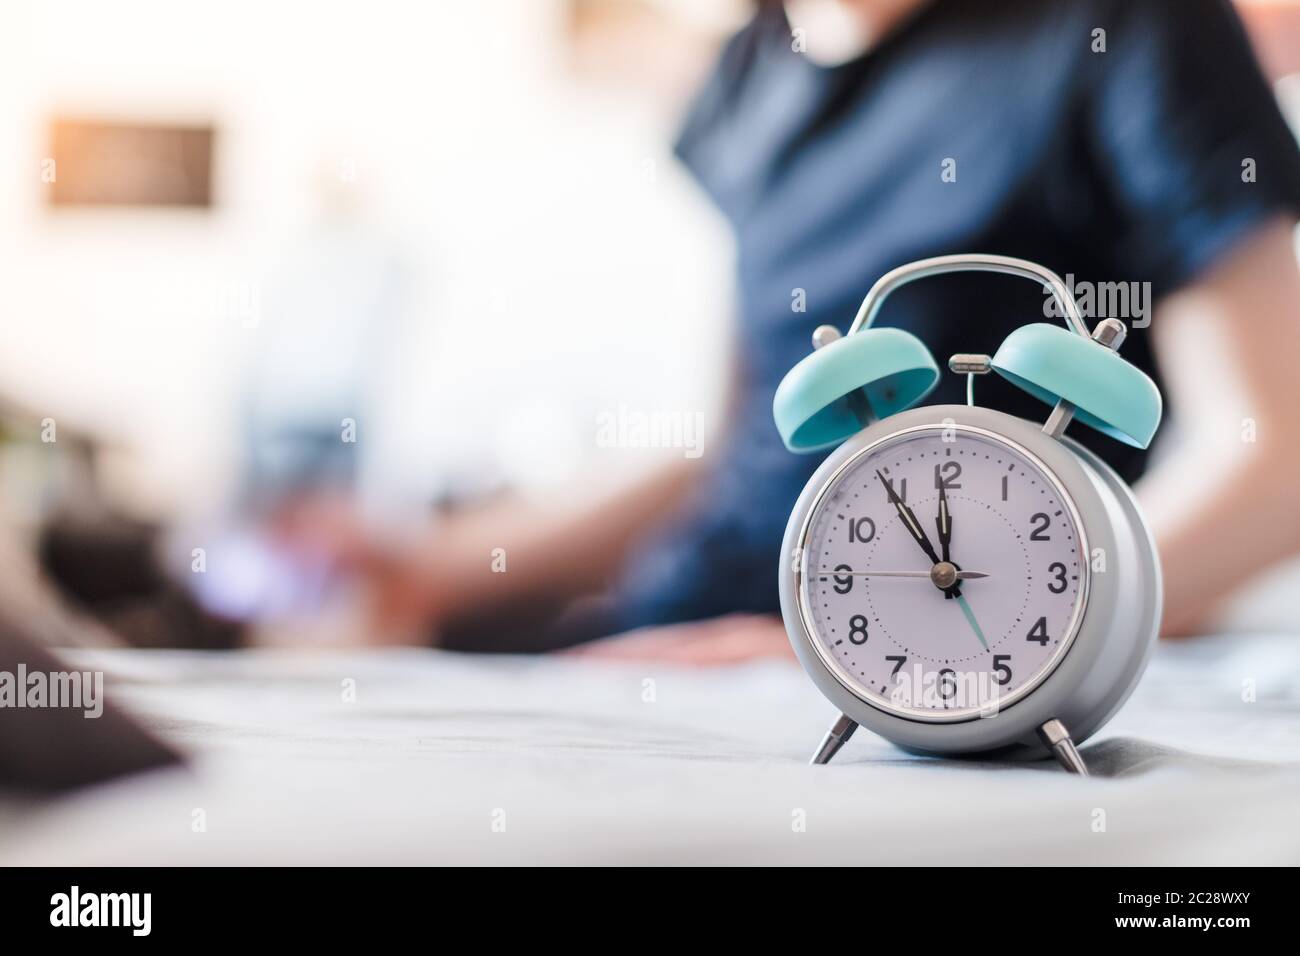 Alarm clock in the morning. Young wakes up and stretches in the blurry background. Stock Photo